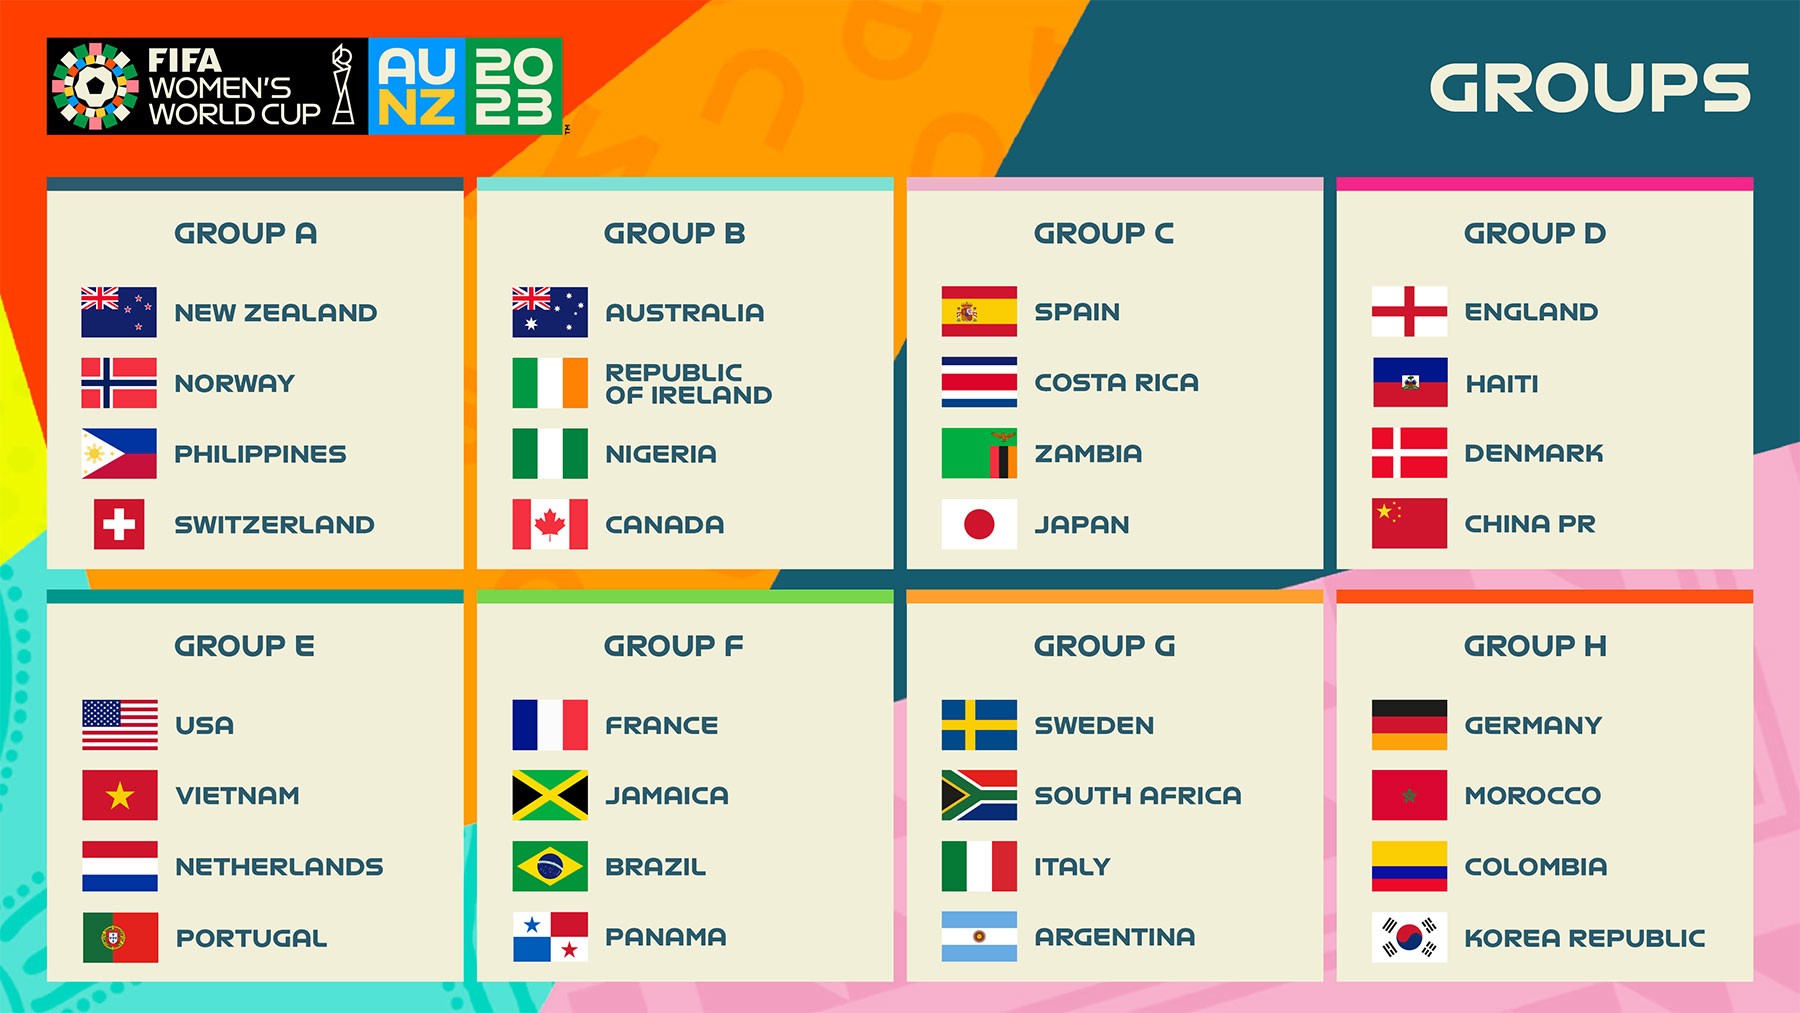 Full lineup of 32 nations confirmed for the FIFA Women’s World Cup